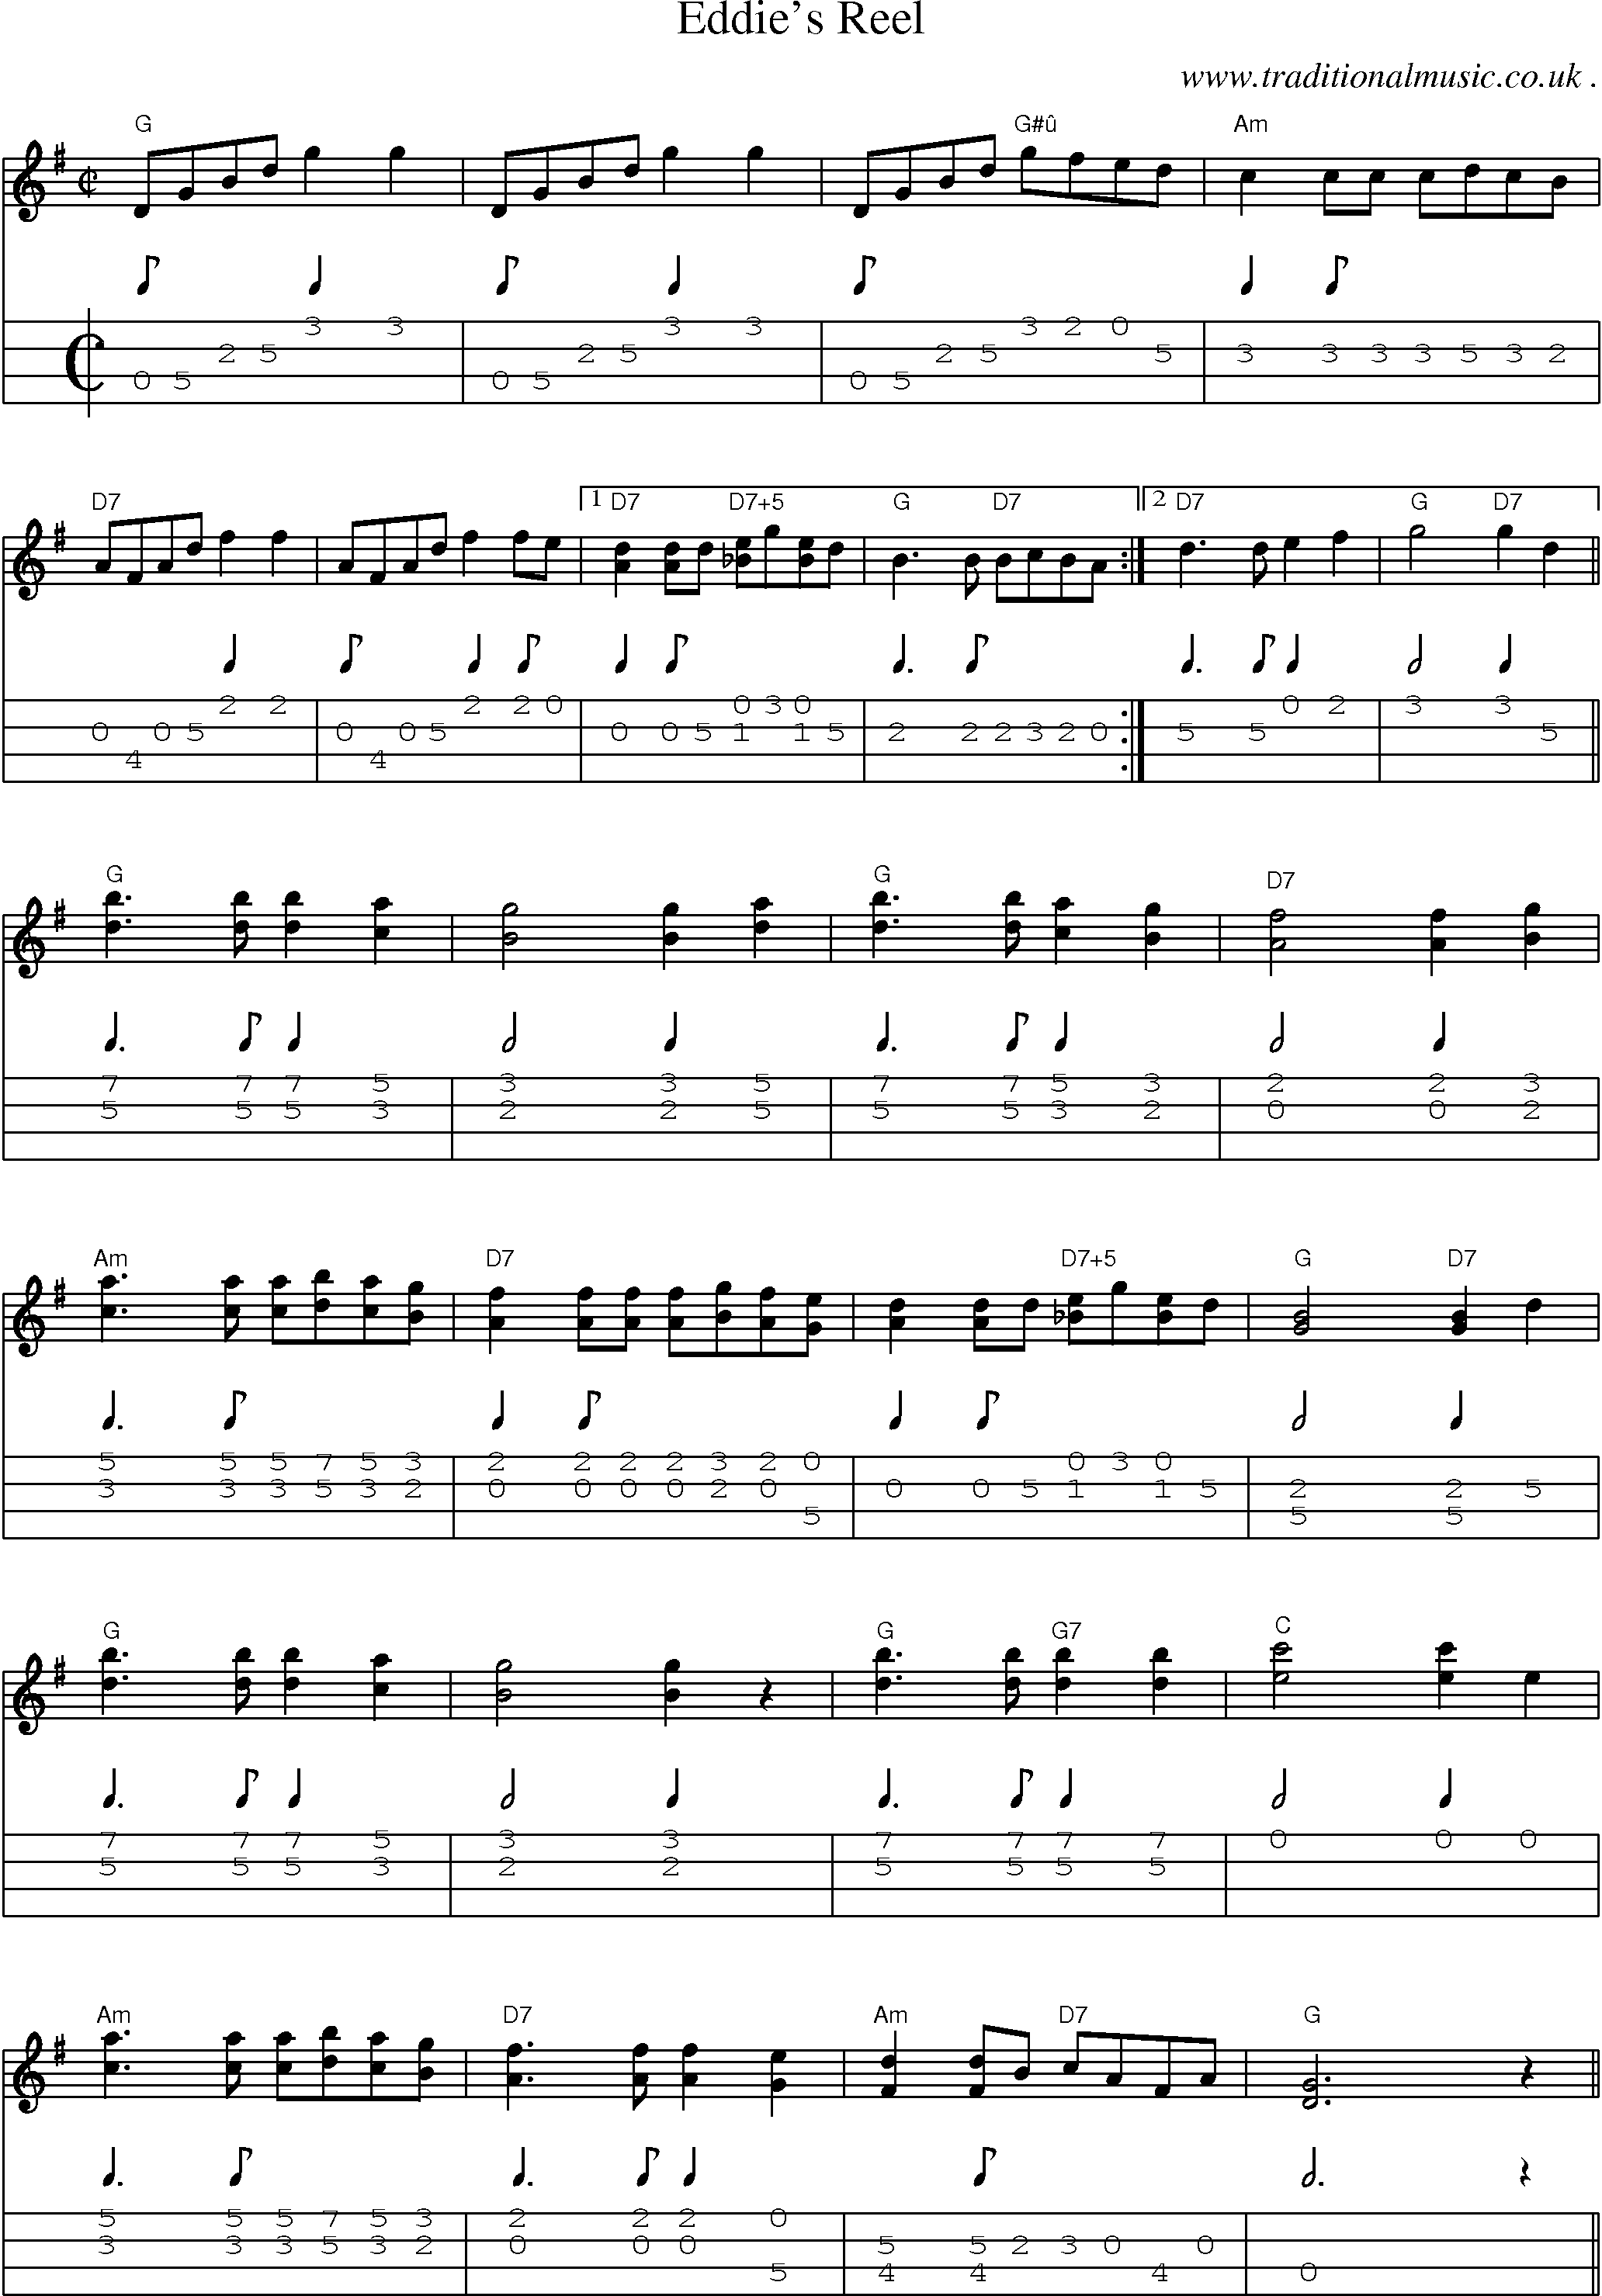 Music Score and Guitar Tabs for Eddies Reel